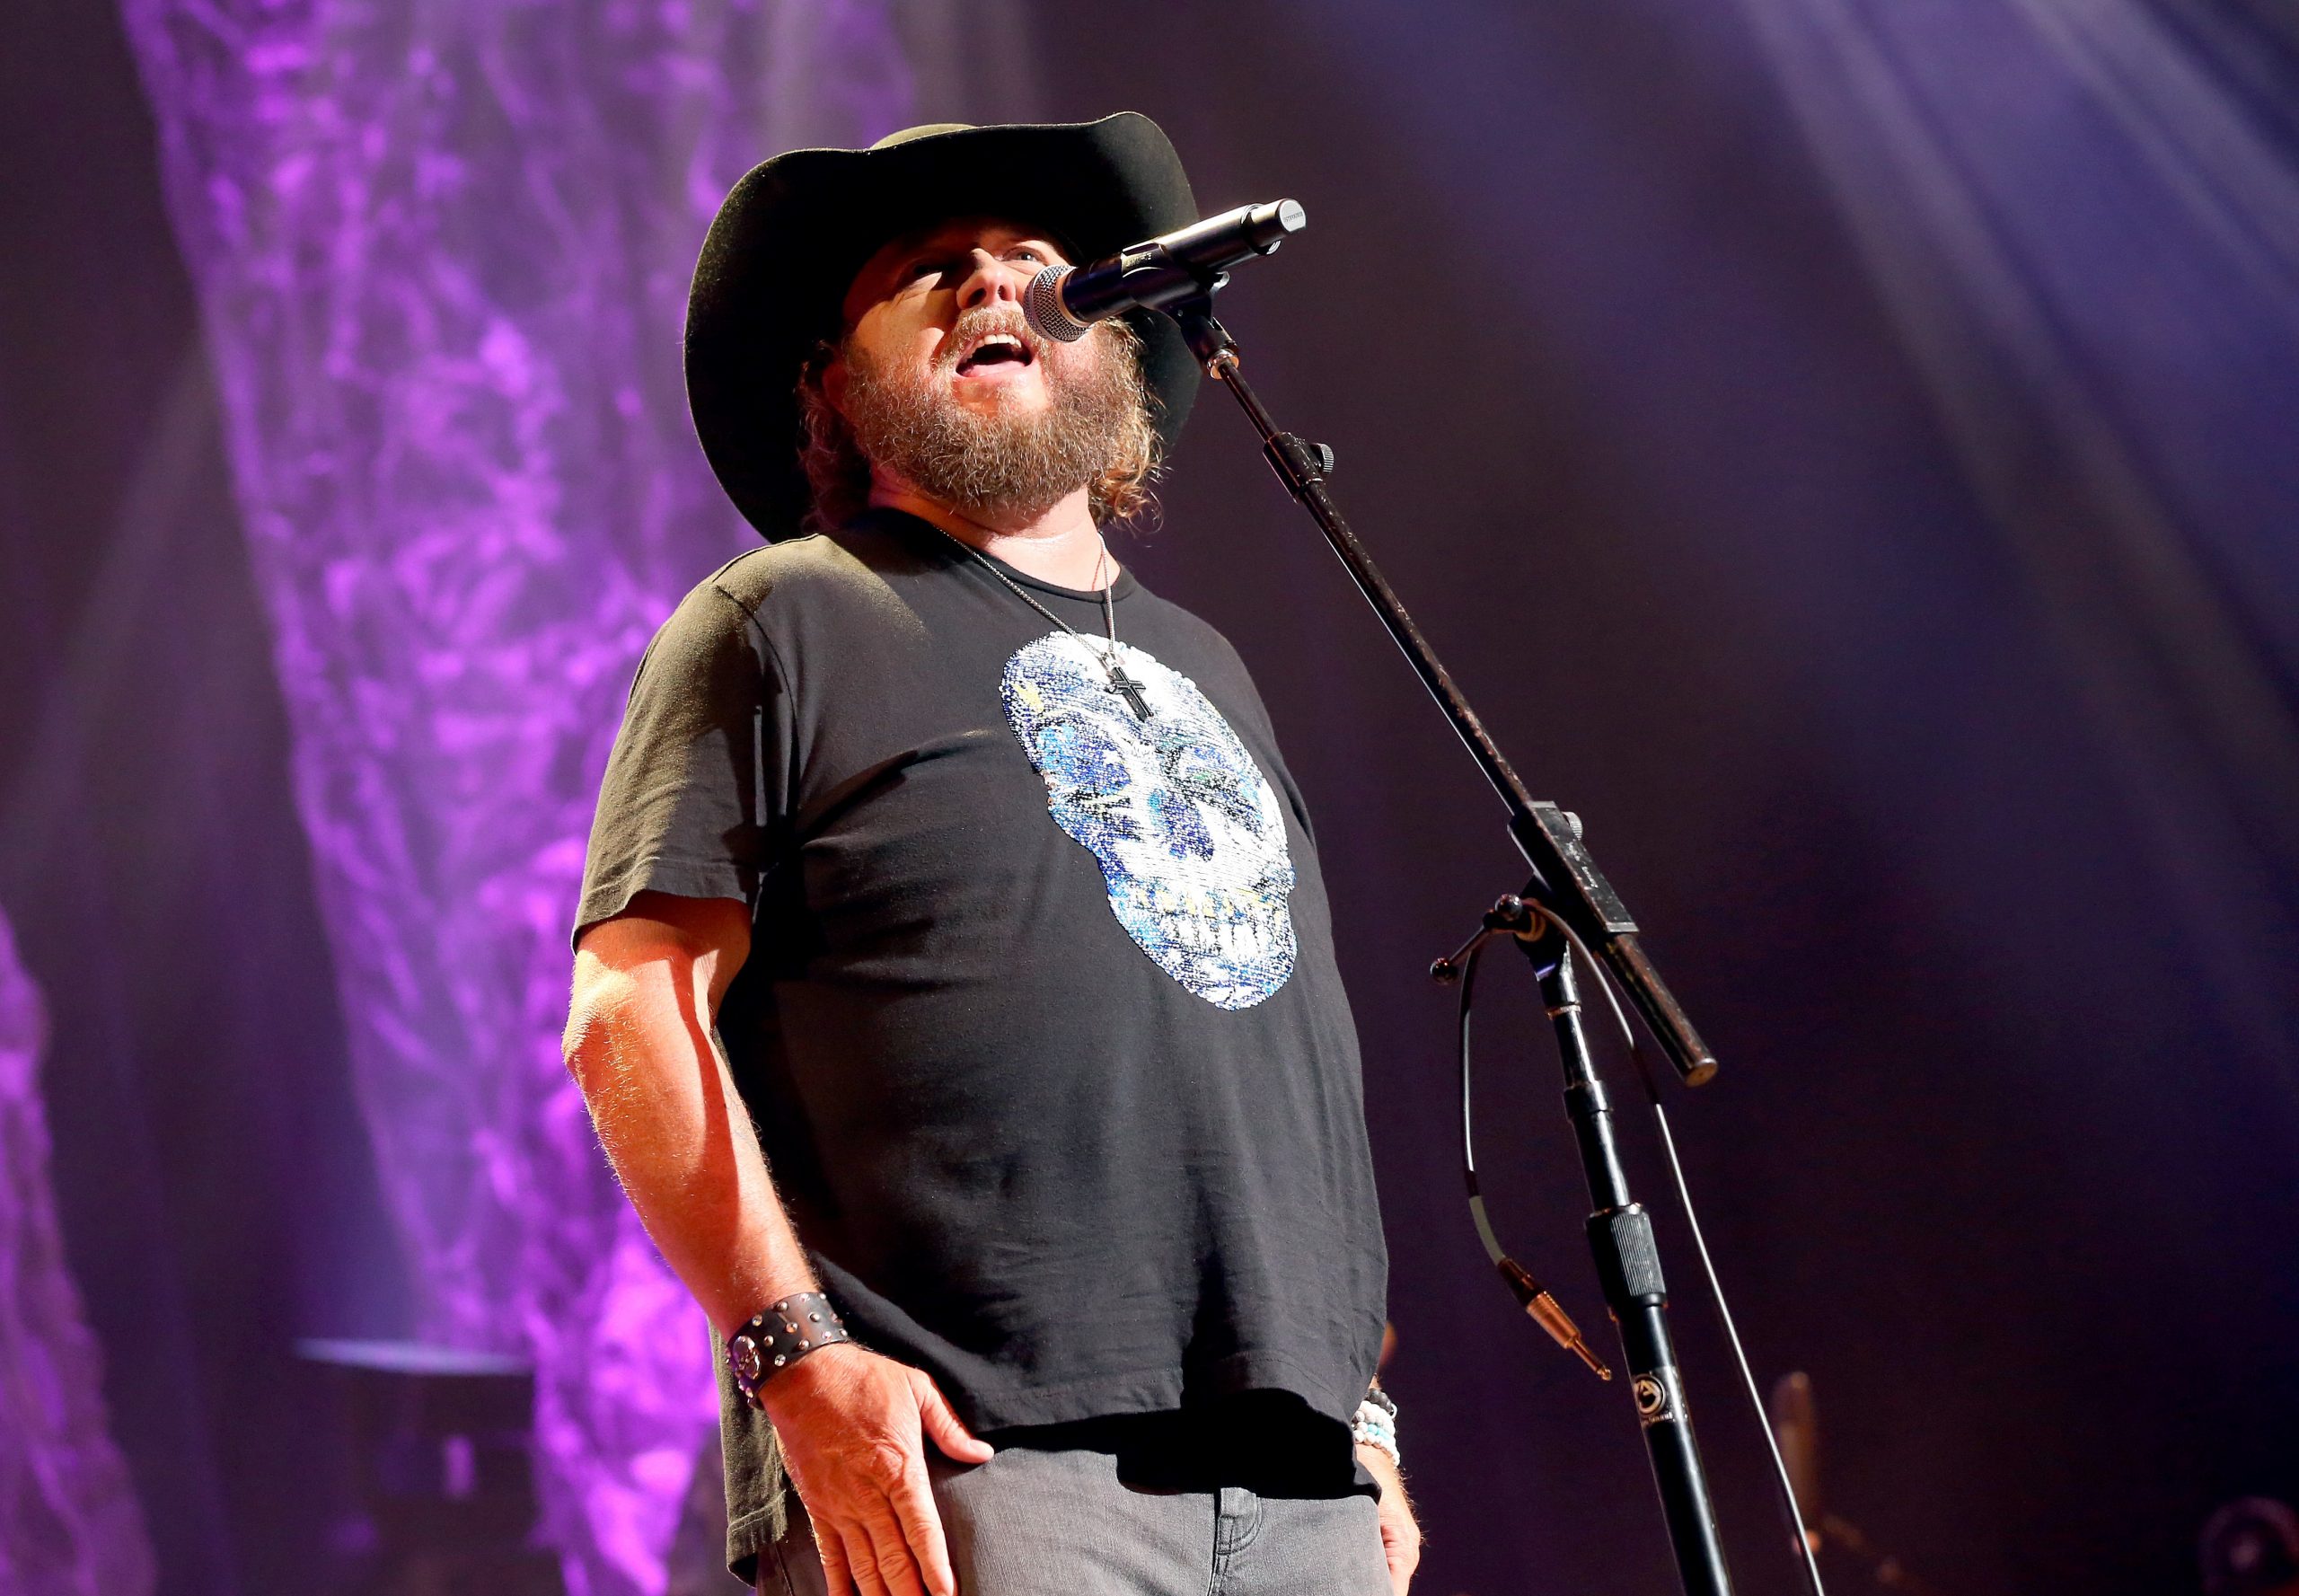 From Rapper To Country Sensation: The Story Of Colt Ford